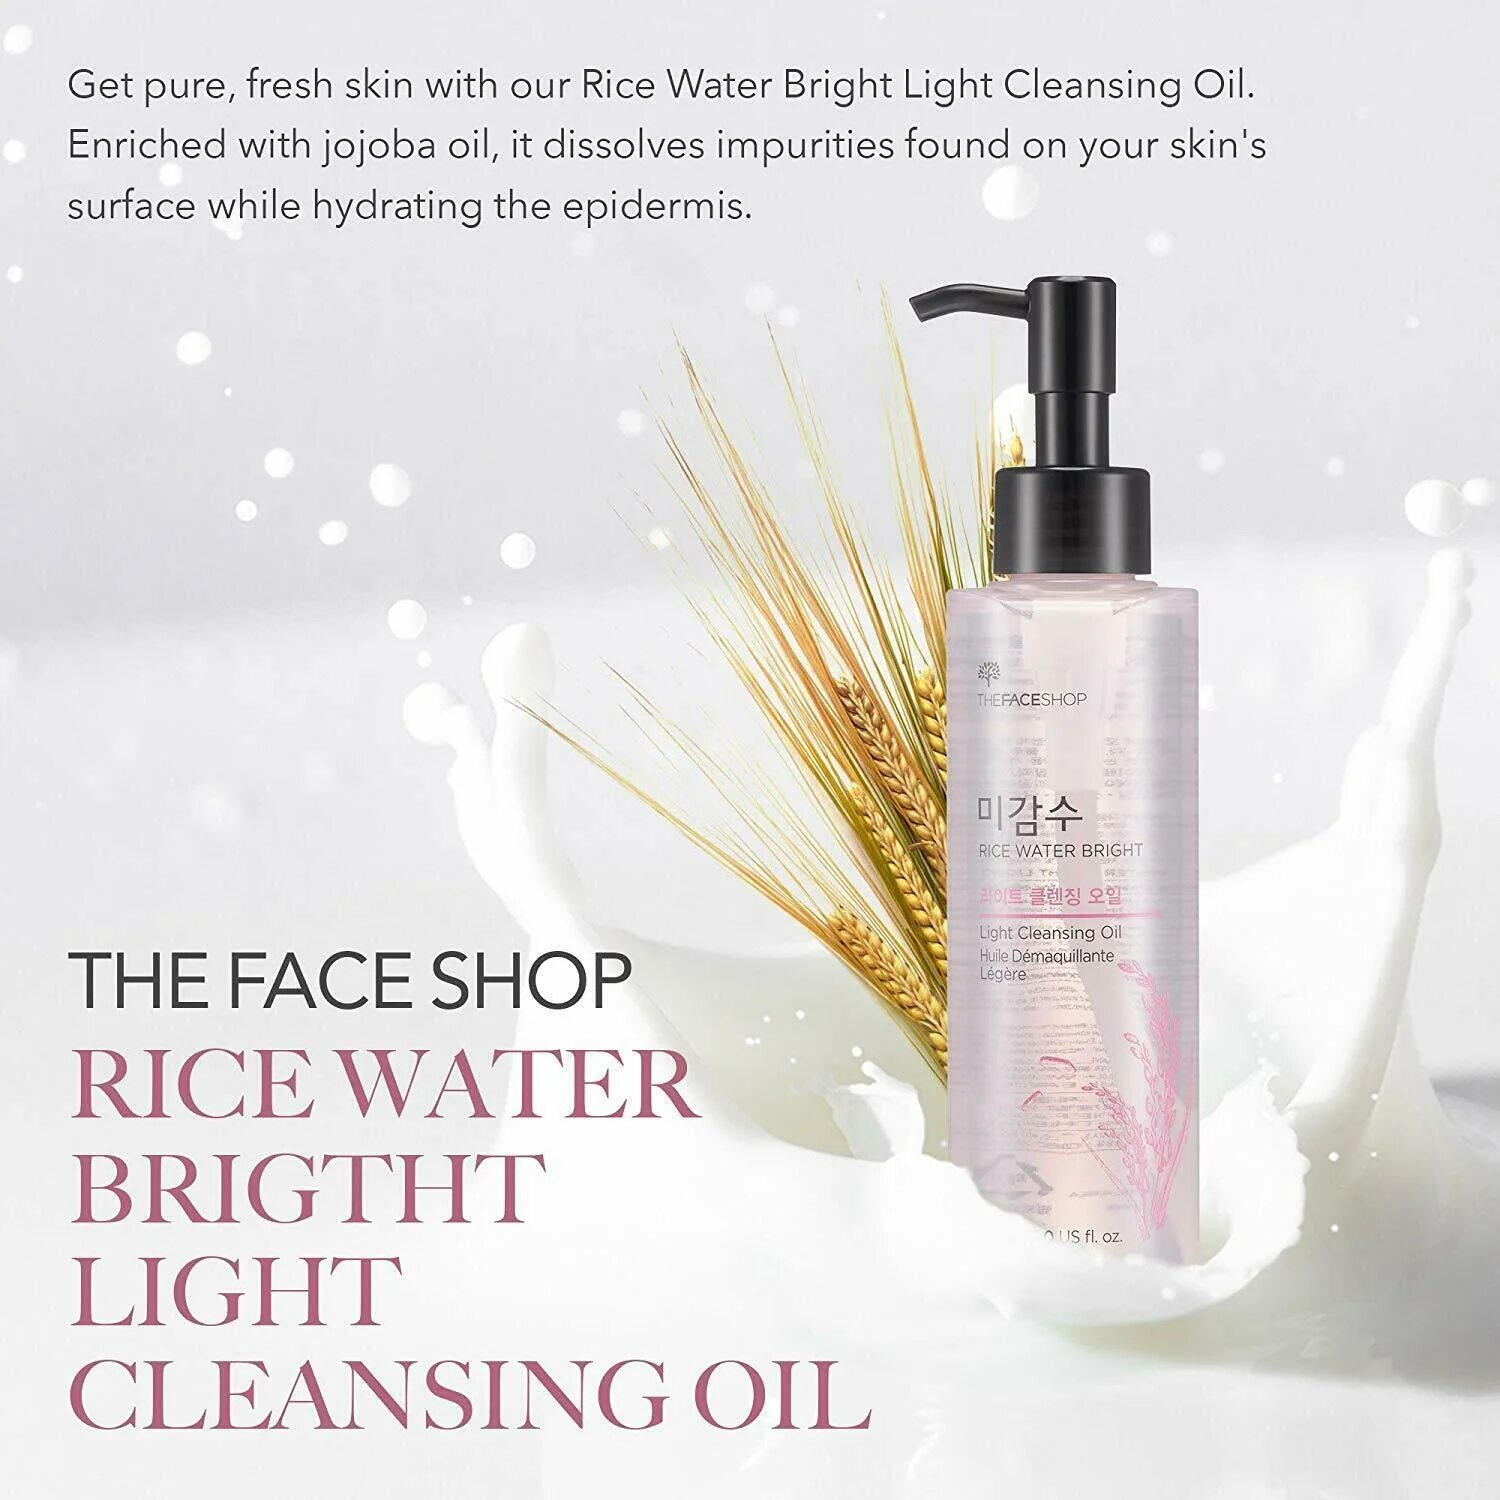 Cleansing light. The face shop Rice Water Bright Light Cleansing. The face shop Rice Water Bright Cleansing Rich Oil (150ml). Rich Cleansing Oil Rice Water Bright гидрофильное. Rice Water Bright Foaming Cleanser.